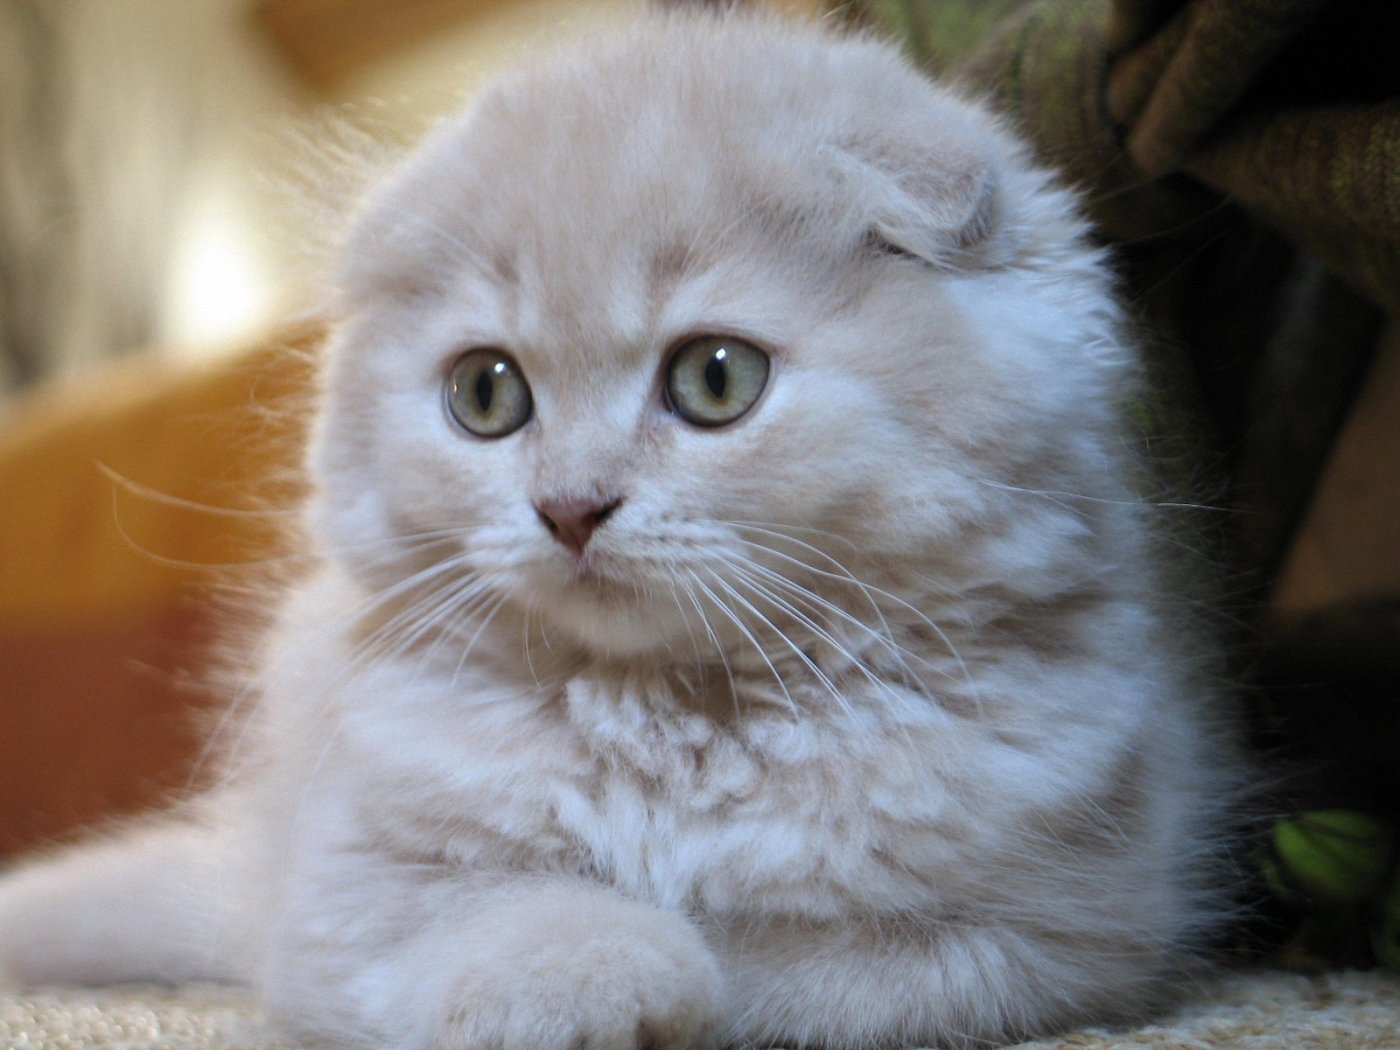 The Scottish Fold has a natural mutation of the